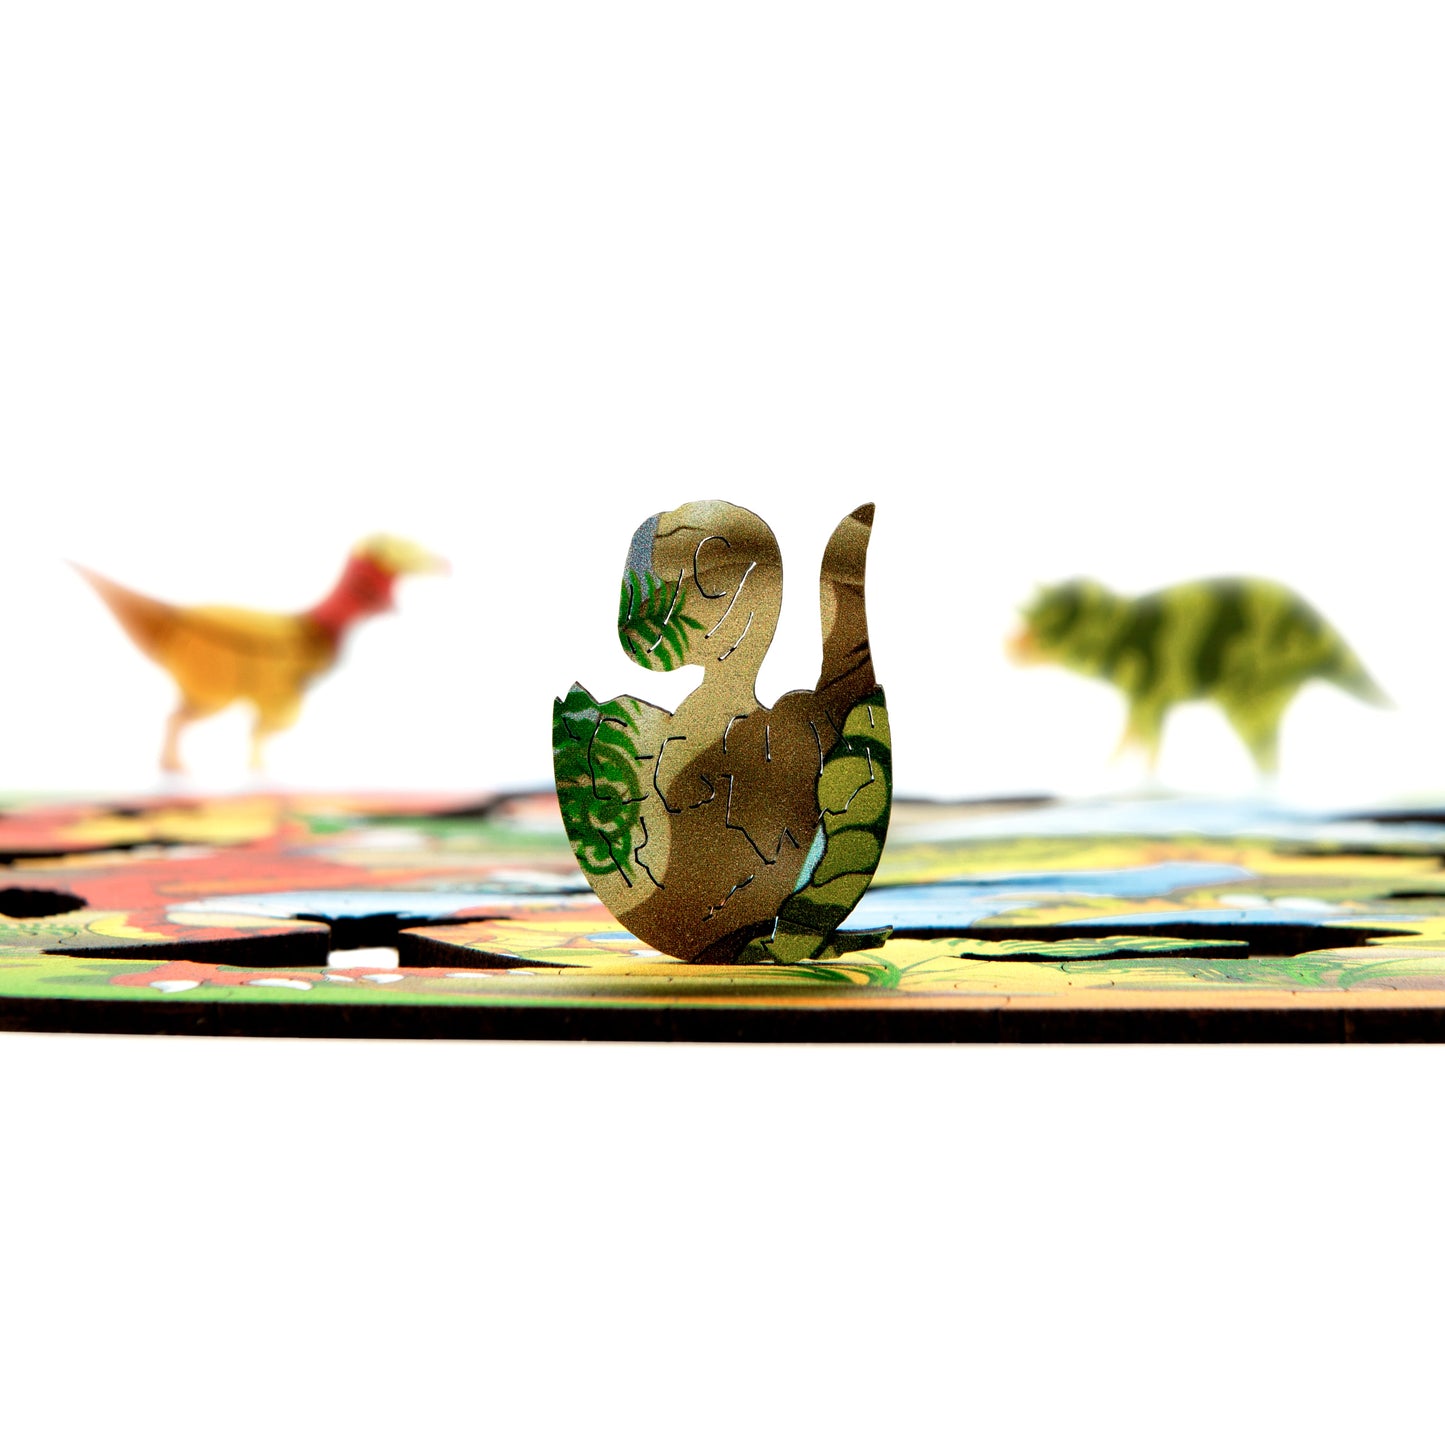 🦖 T-Rex Family Wooden Puzzle - Dinosaurs Fun & Educational Active Puzzles